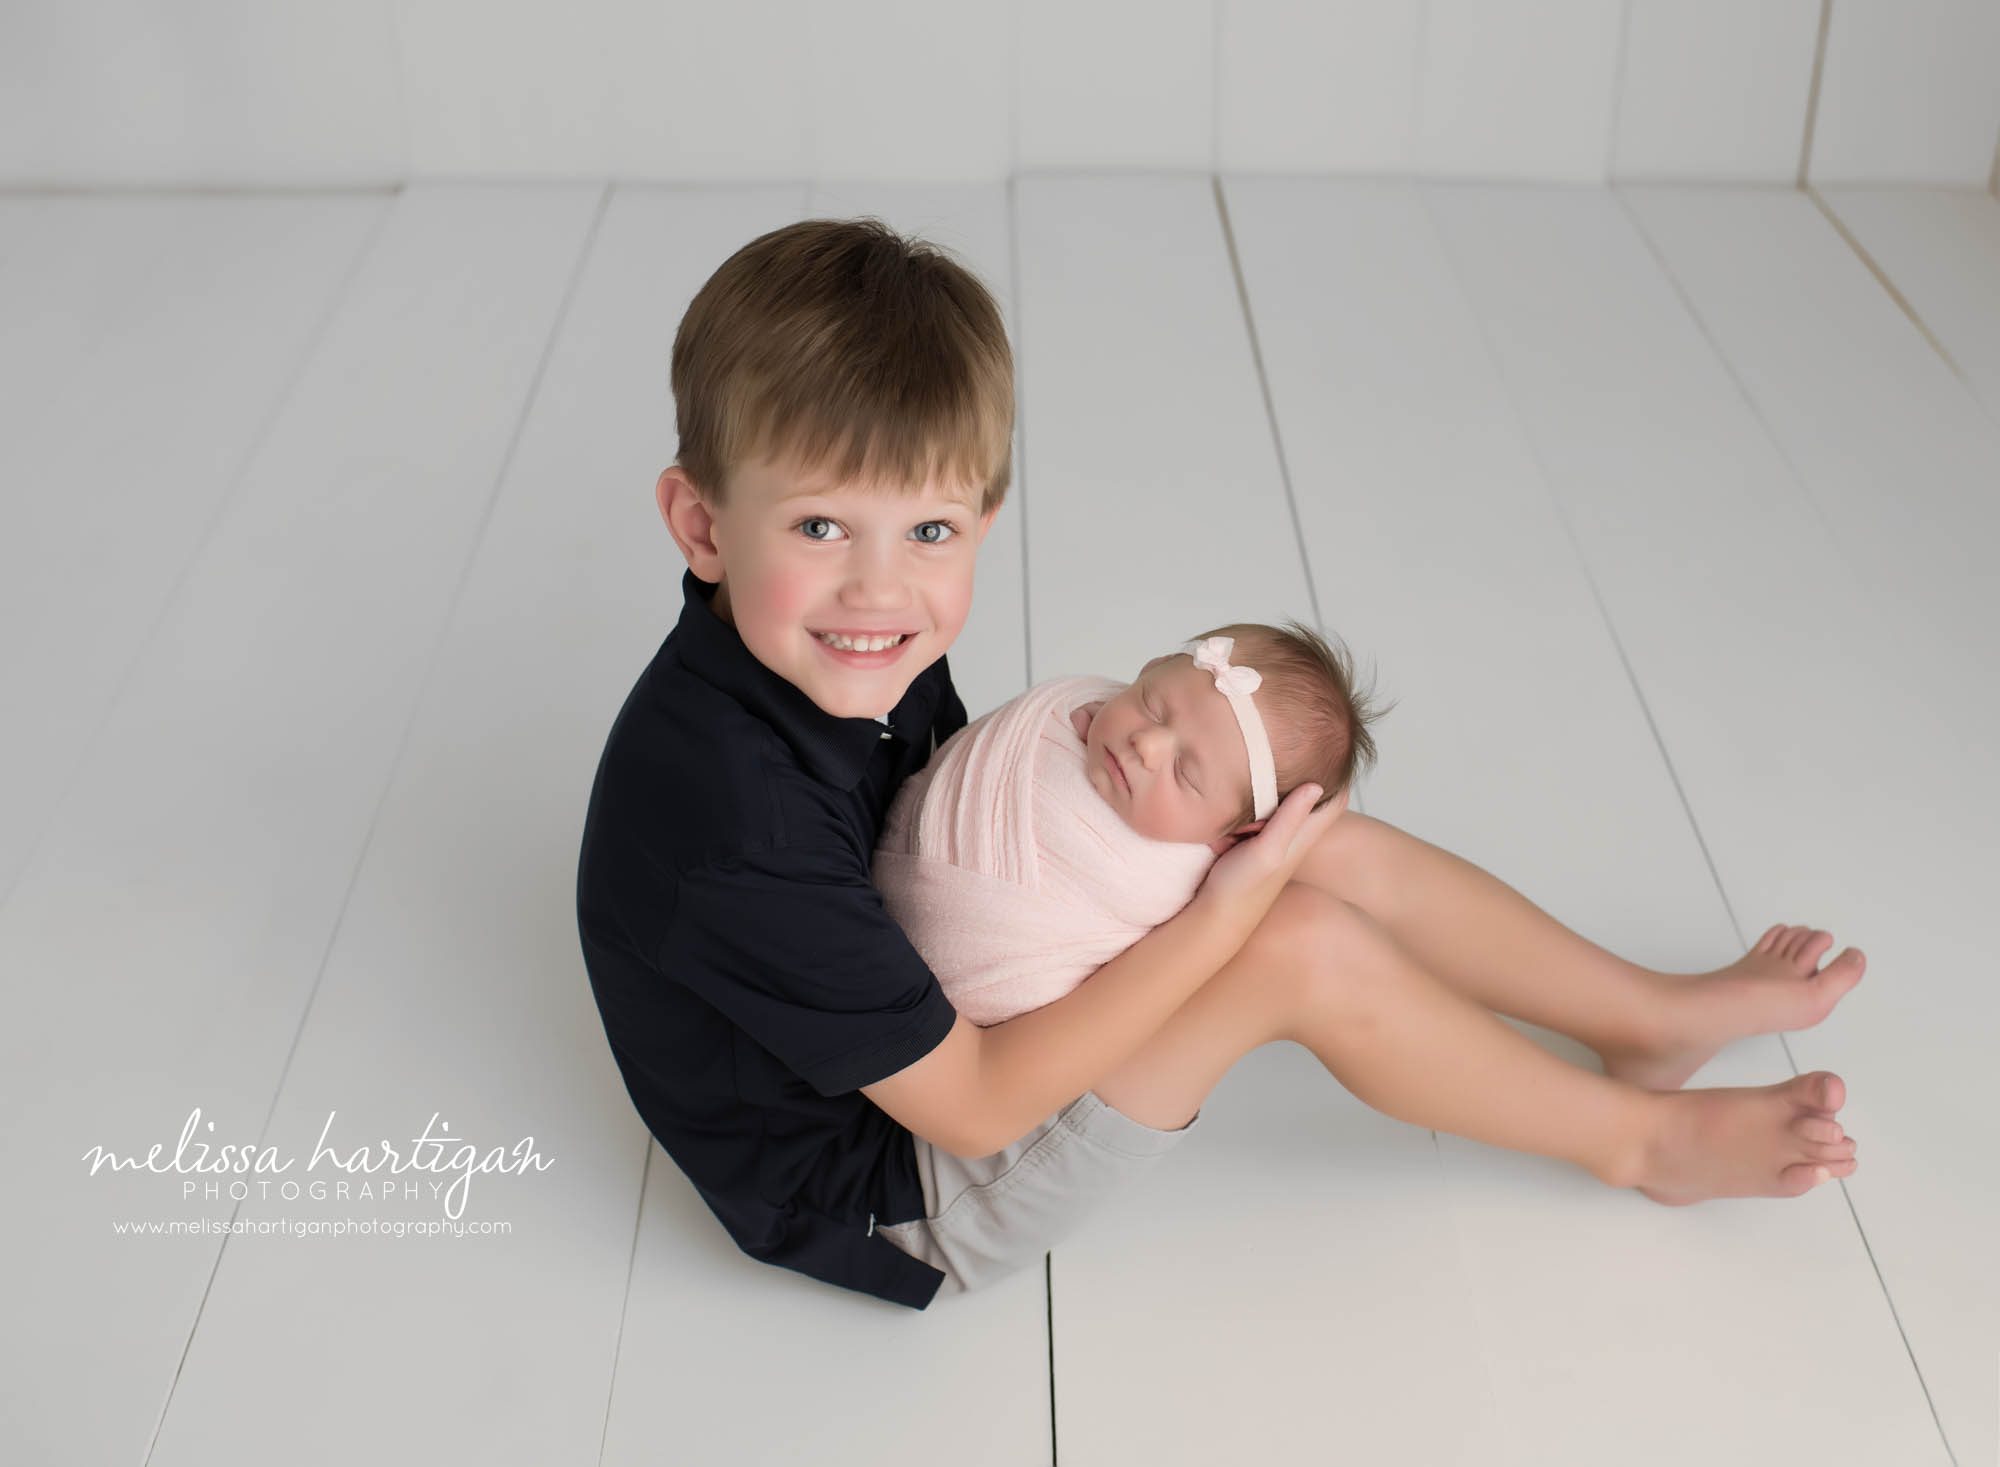 big brother sitting on wooden planks in connecticut photography studio holding newborn baby sister for family photo